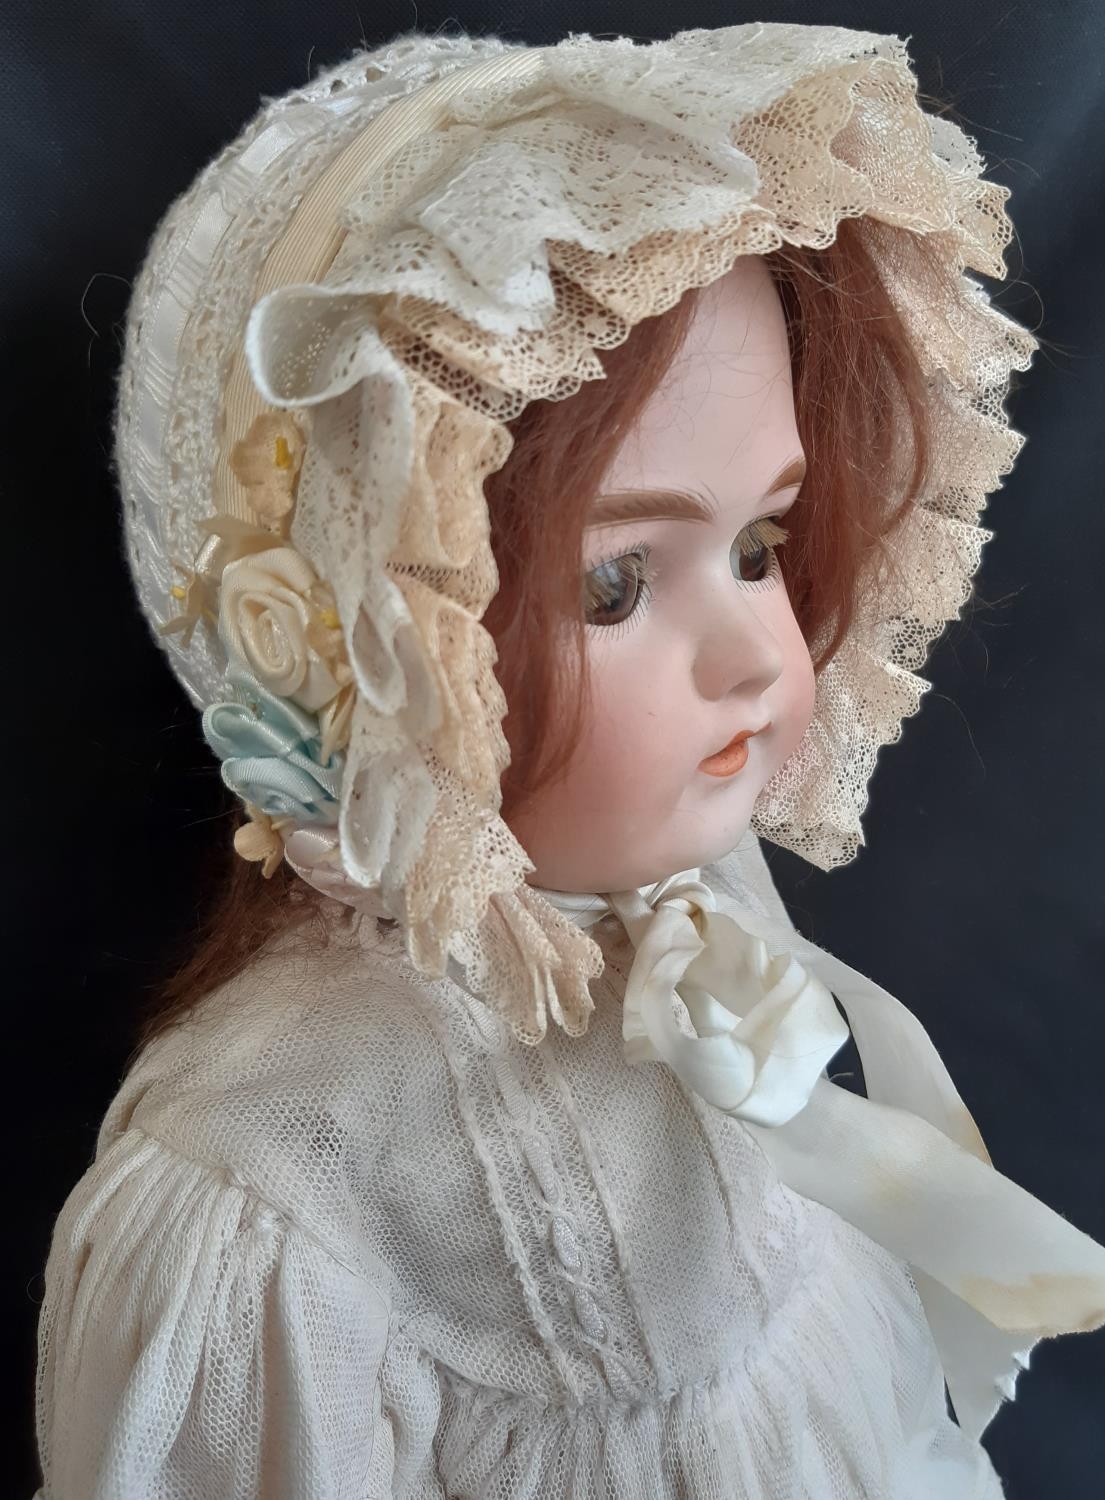 Early 20th century bisque head doll with jointed composition body, closing brown eyes, open mouth - Image 3 of 7